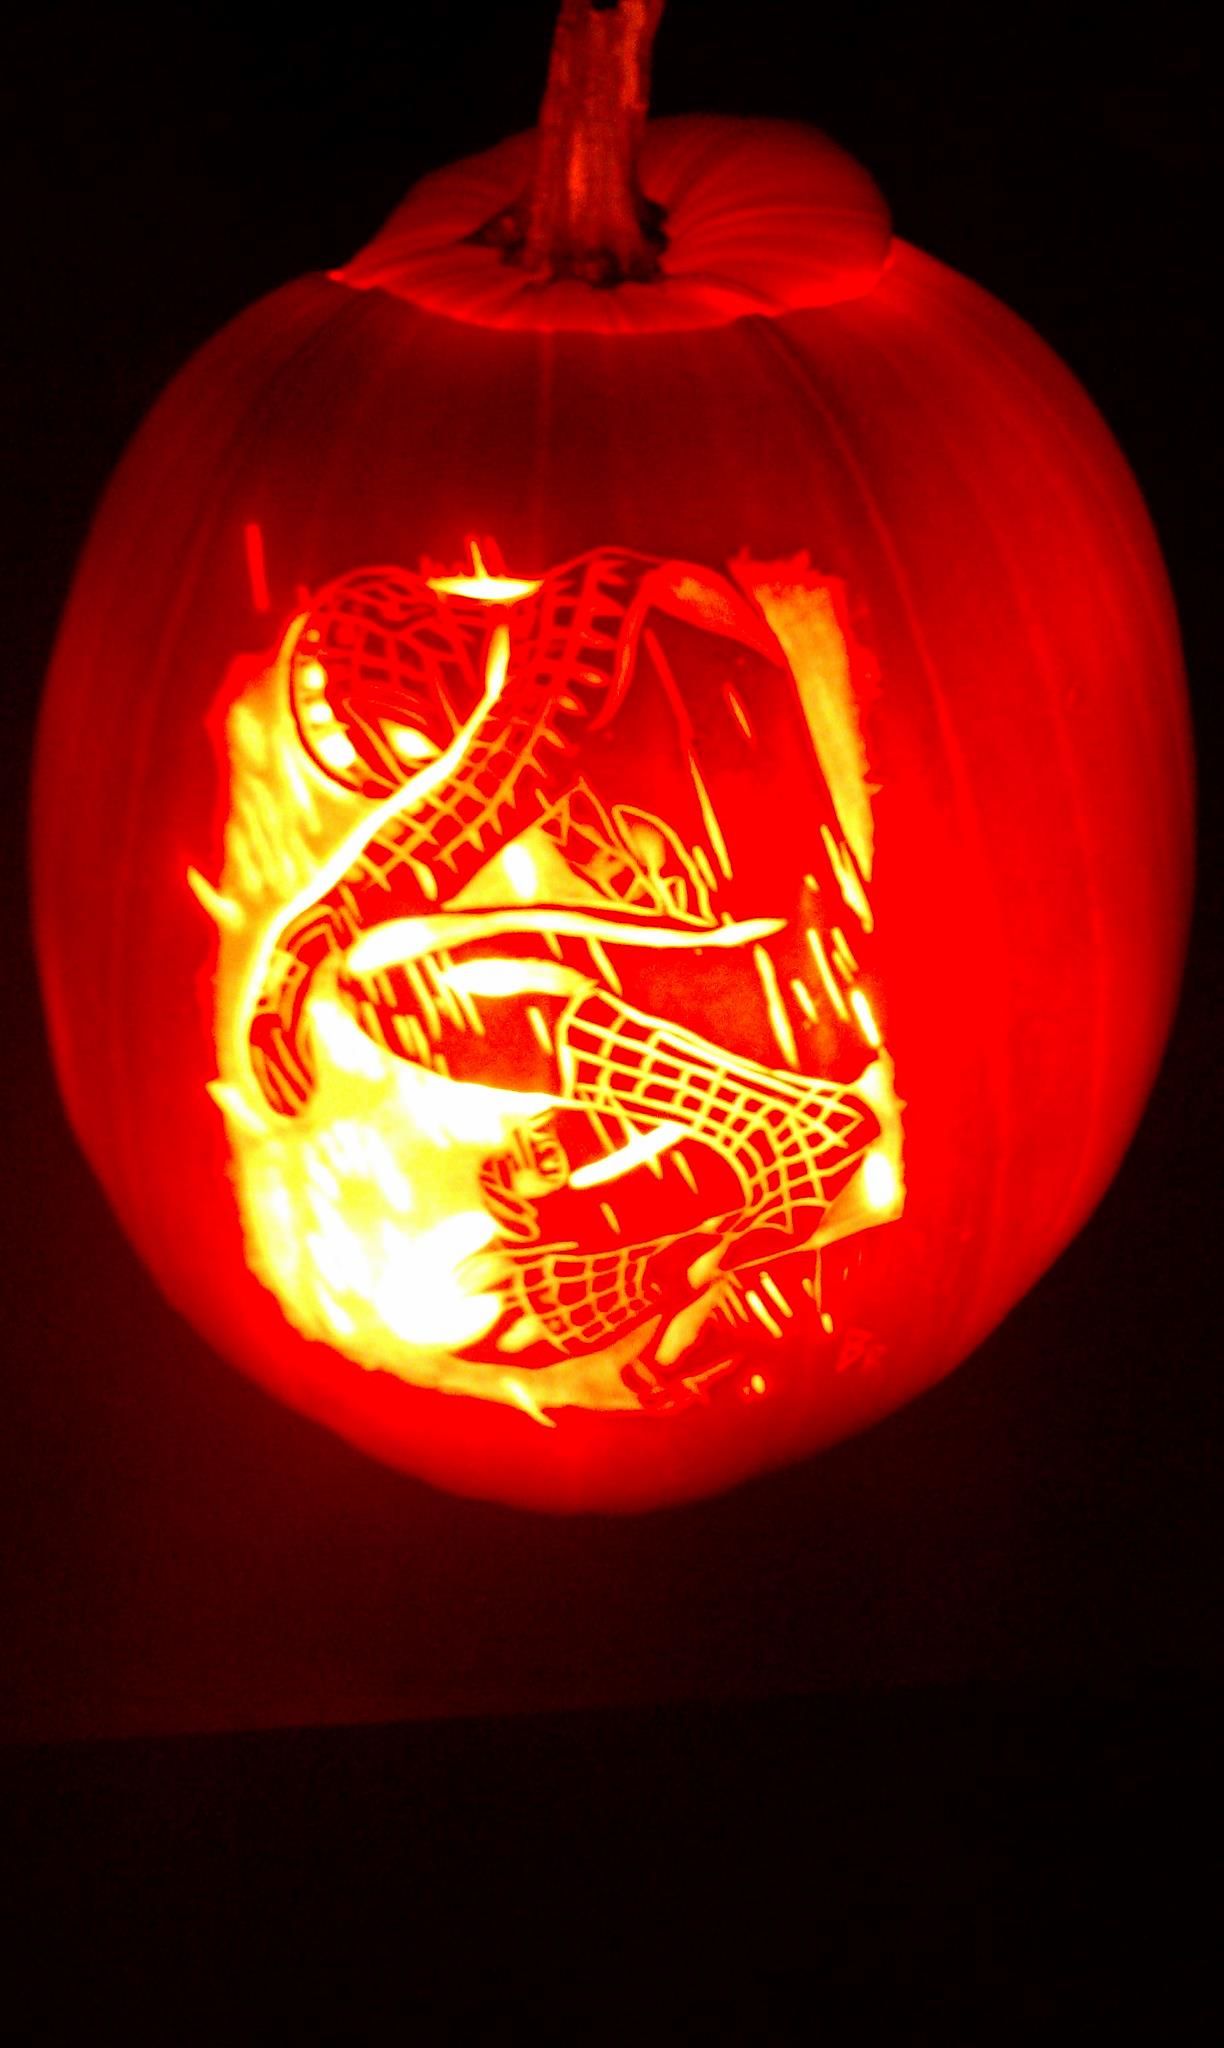 Carved Spiderman pumpkin might become a real piece of art